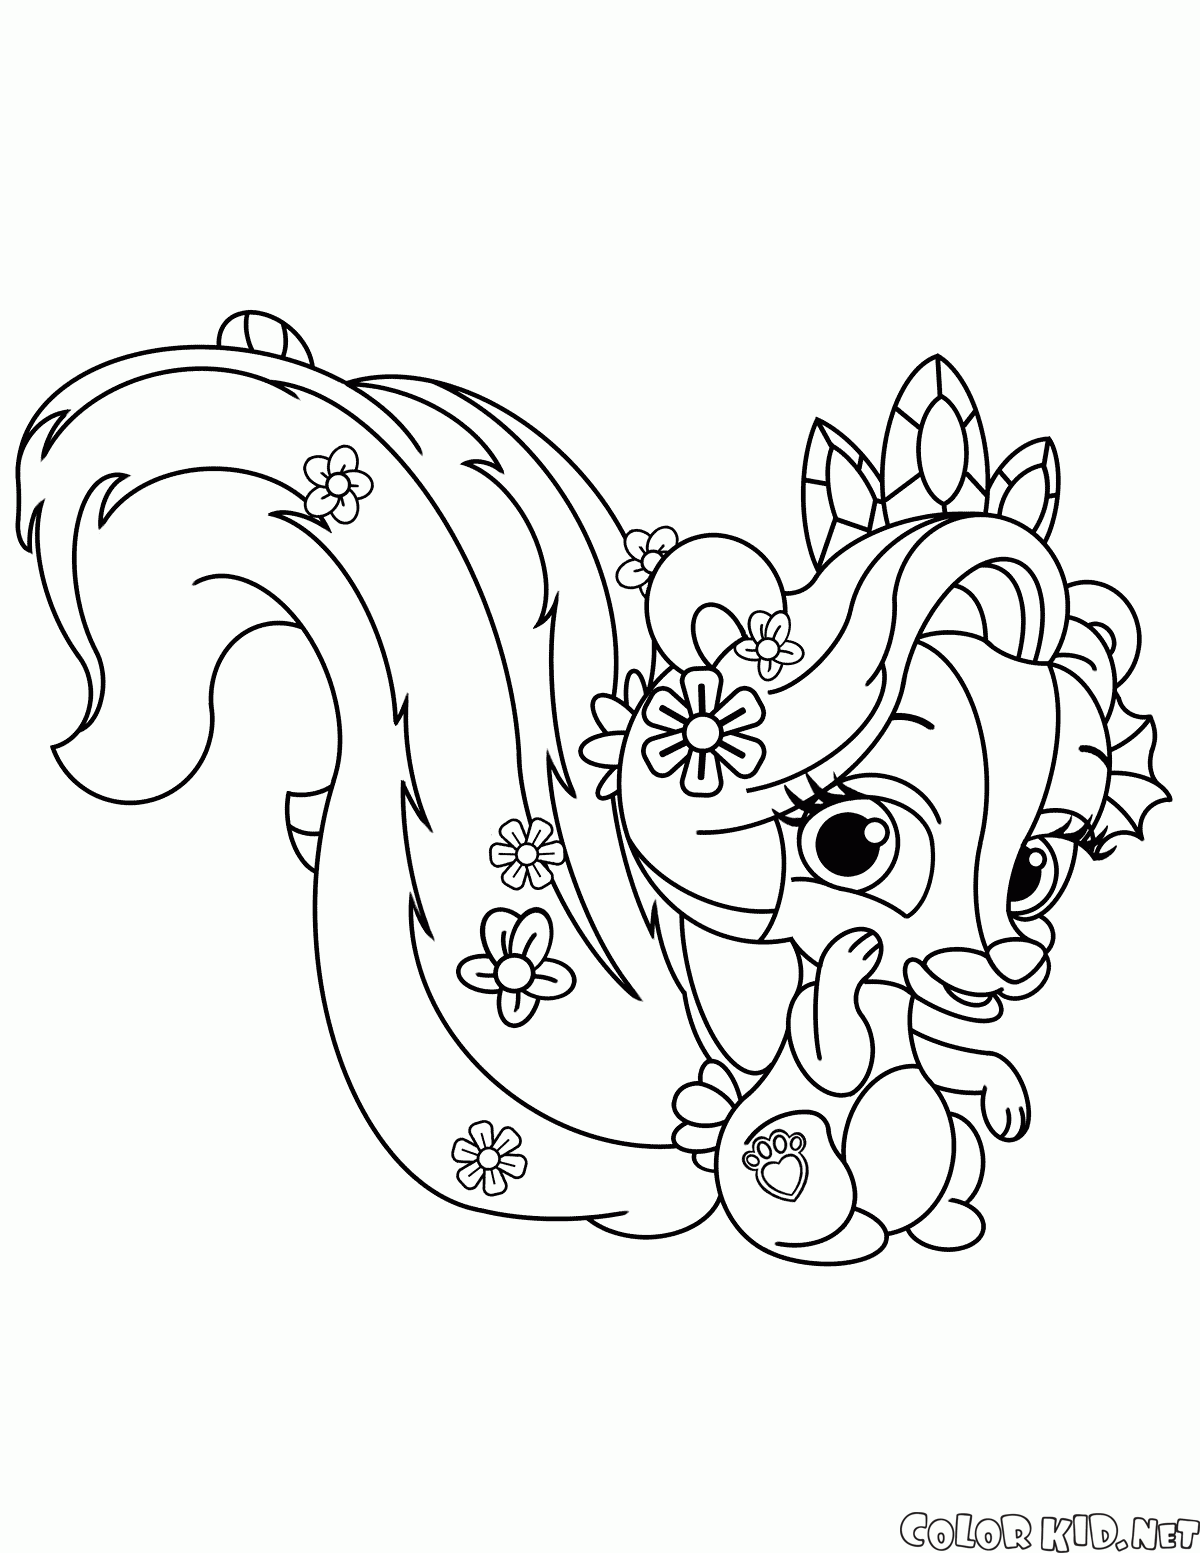 Flower The Skunk Coloring Pages - Coloring Home